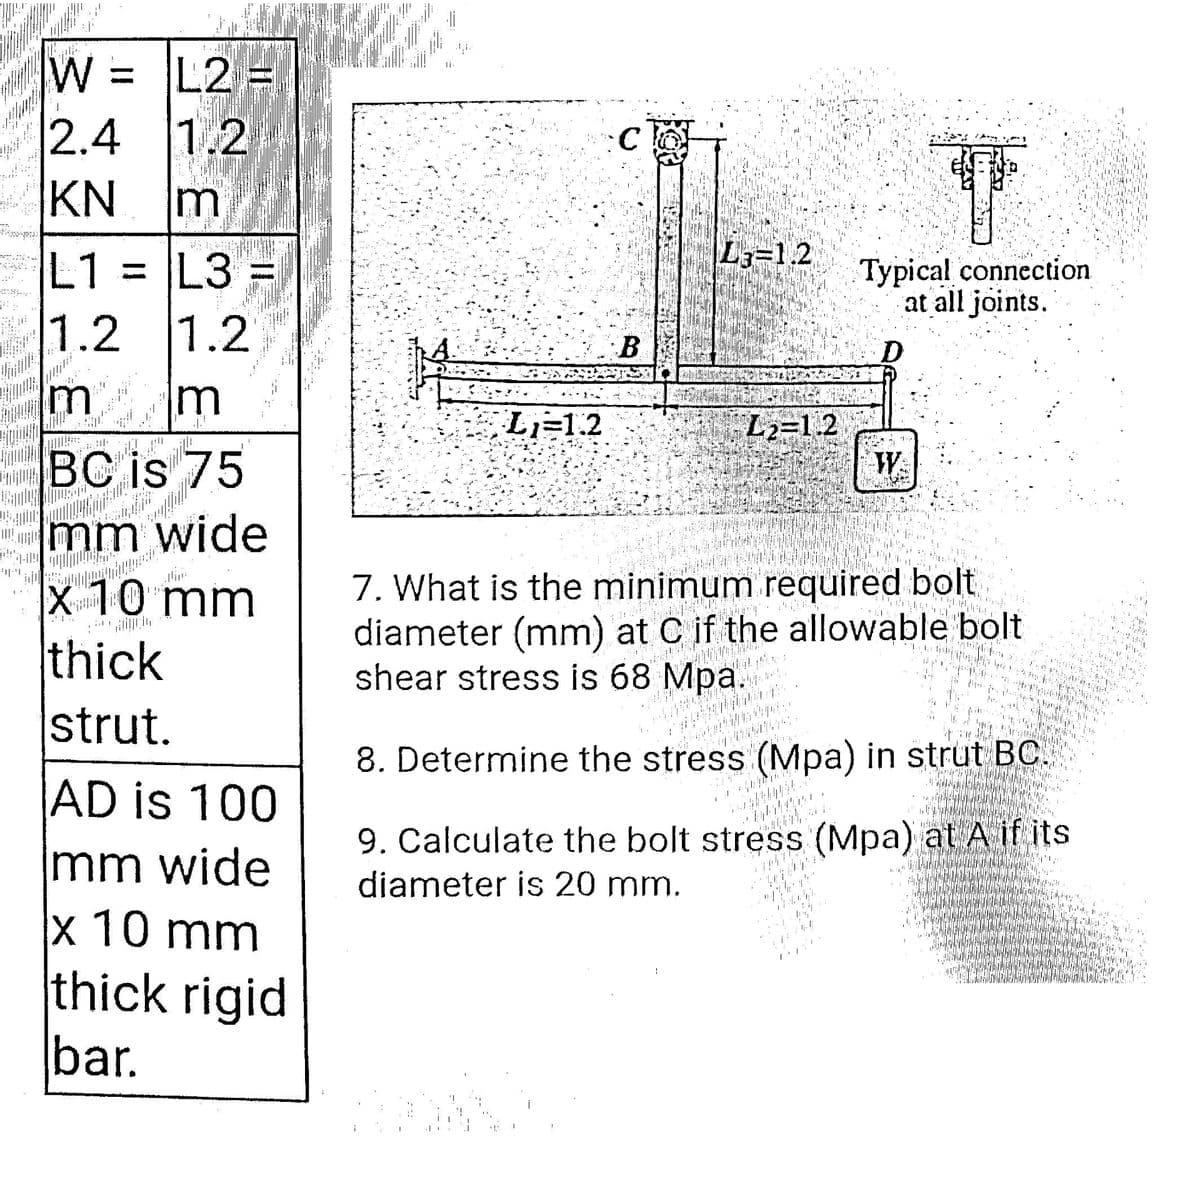 W
L2 =
= M
2.4 1.2
KN
m
L1 = L3
L3=1.2
Typical connection
at all joints.
1.2 1.2
B.
D.
m
L2=1.2
W
L=1.2
BC is 75
mm wide
x 10 mm
thick
strut.
7. What is the minimum required bolt
diameter (mm) at C if the allowable bolt
shear stress is 68 Mpa.
iliin
8. Determine the stress (Mpa) in strut BC.
AD is 100
mm wide
x 10 mm
thick rigid
bar.
9. Calculate the bolt stress (Mpa) at A if its
diameter is 20 mm.
